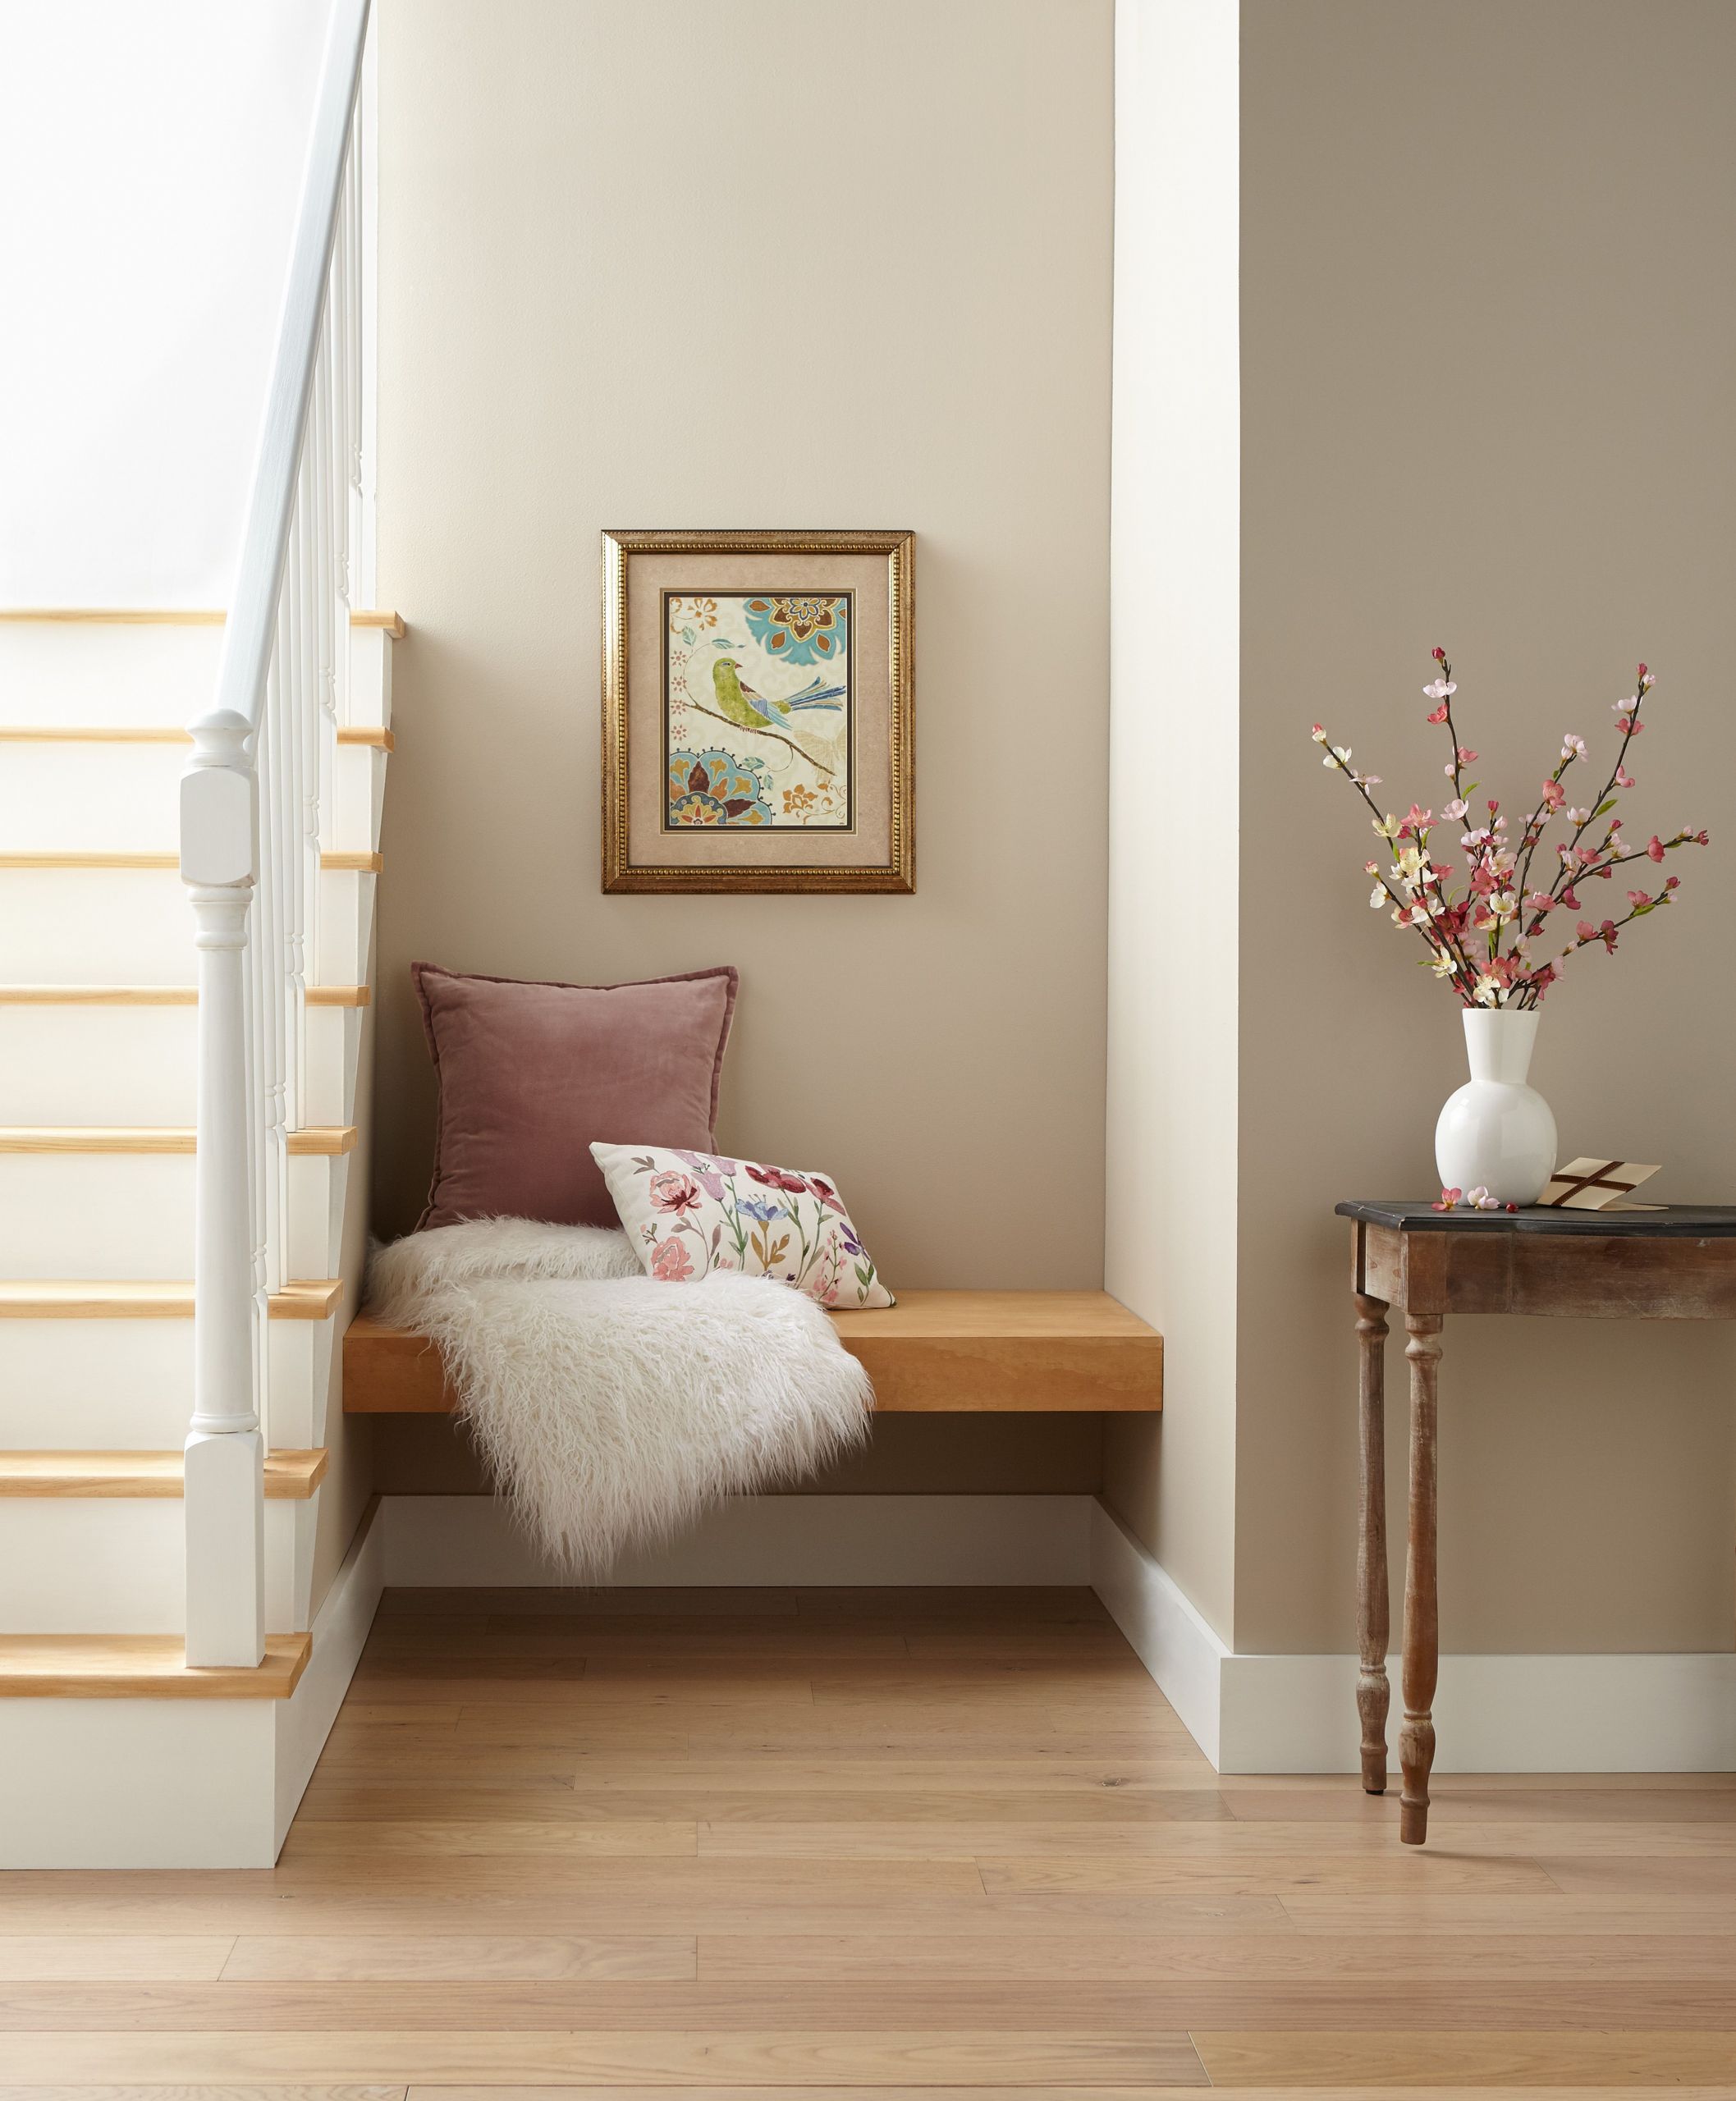 Bedroom Colors For 2020
 These Are the Paint Color Trends for 2020 According to Behr